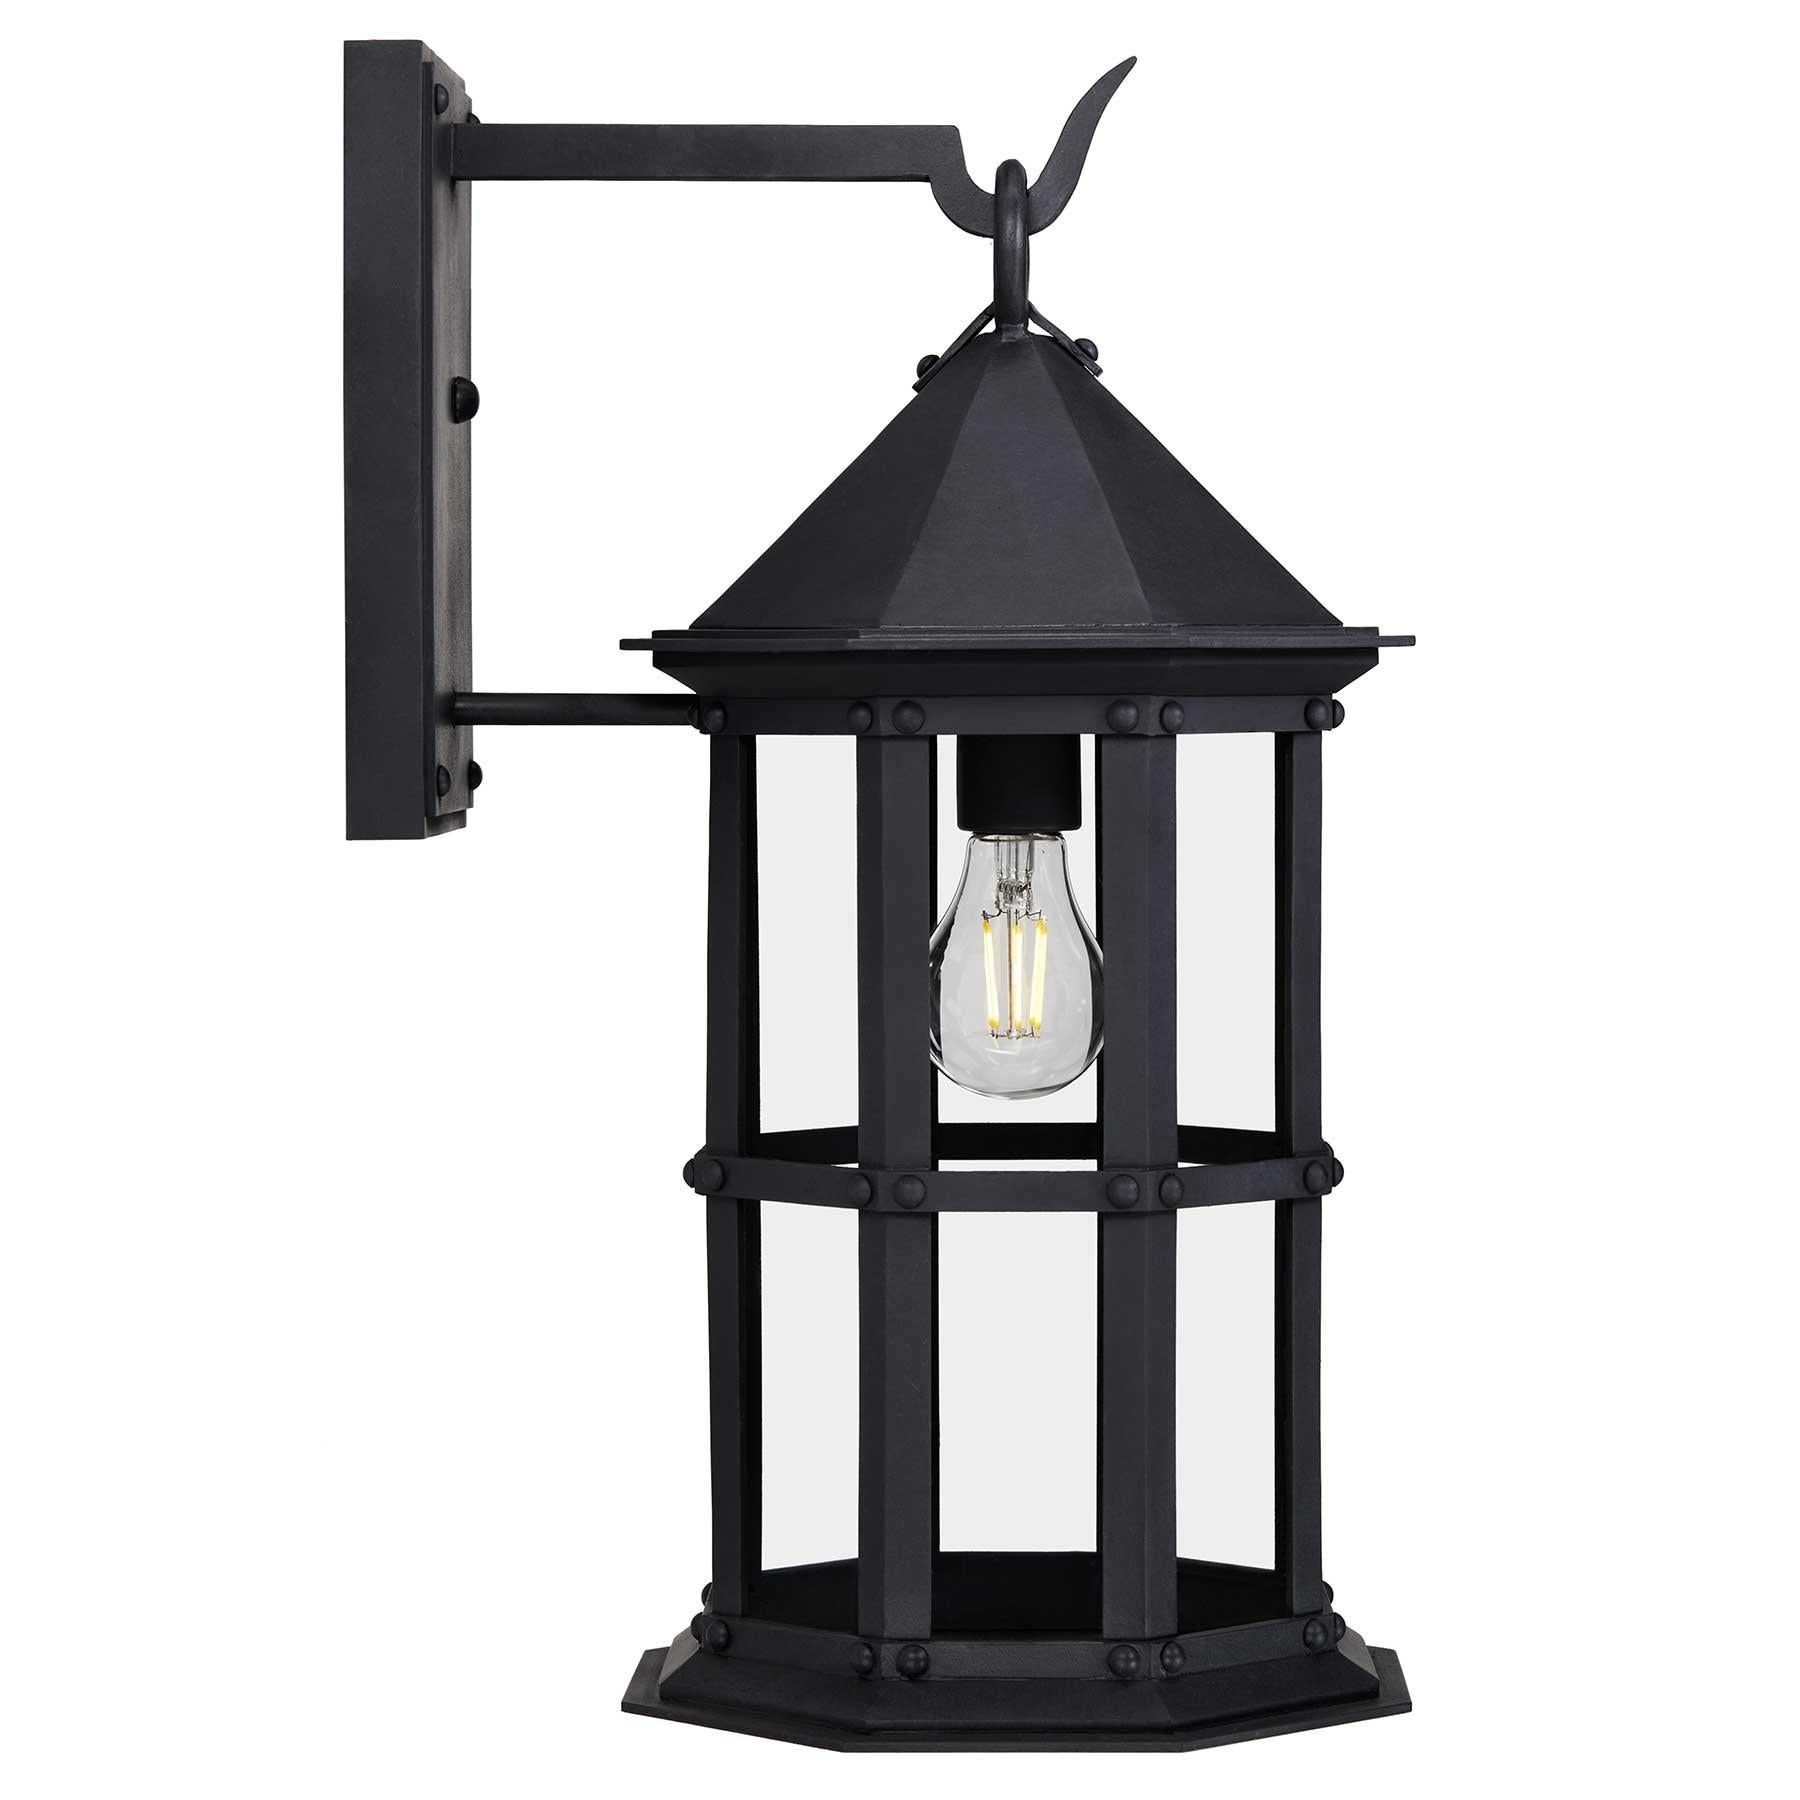 Referencing the historic Arlington Theater in downtown Santa Barbara, California this lantern echoes the Mission Revival style in which the theater was designed.  With an eight sided profile, low-pitched lid and solid cage, this lantern conveys